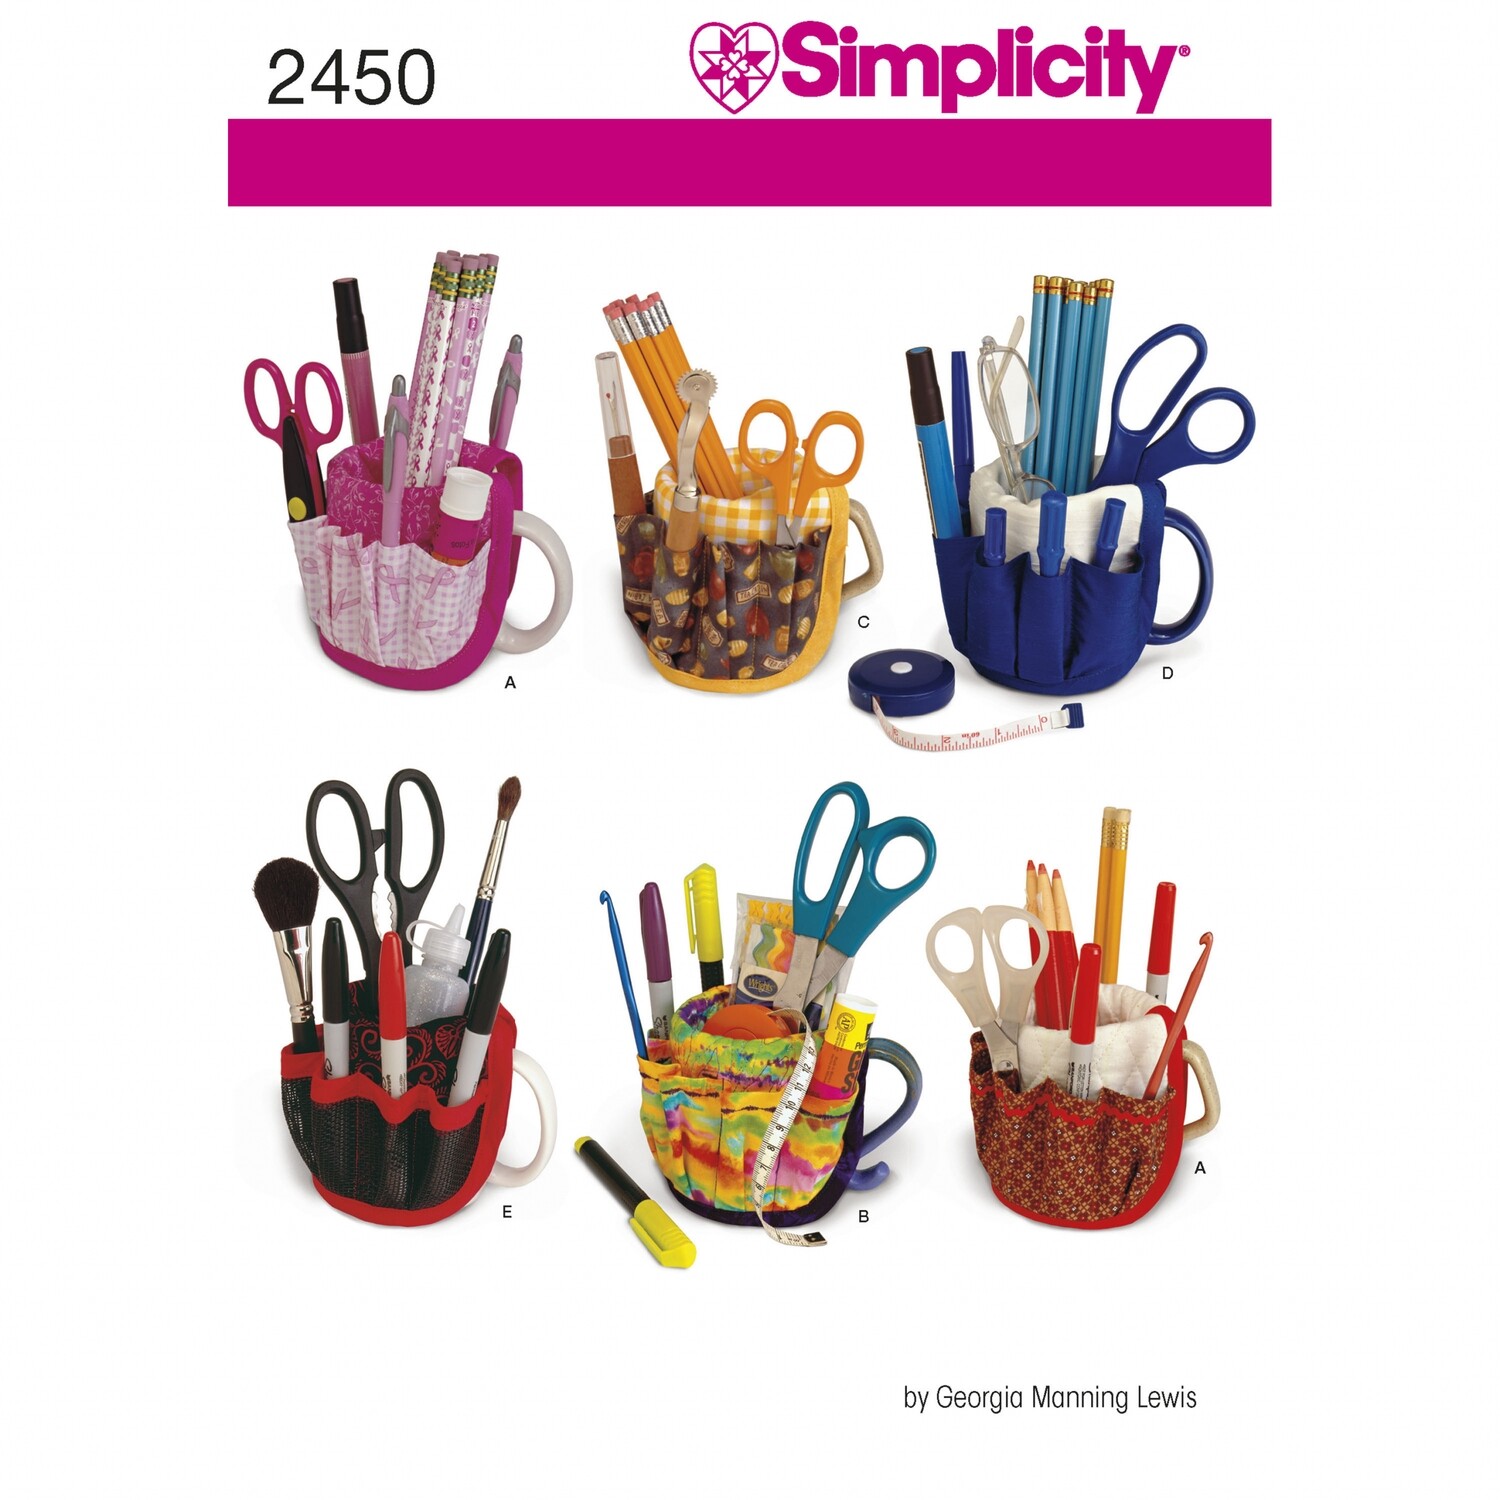 Simplicity Sewing Pattern 2450